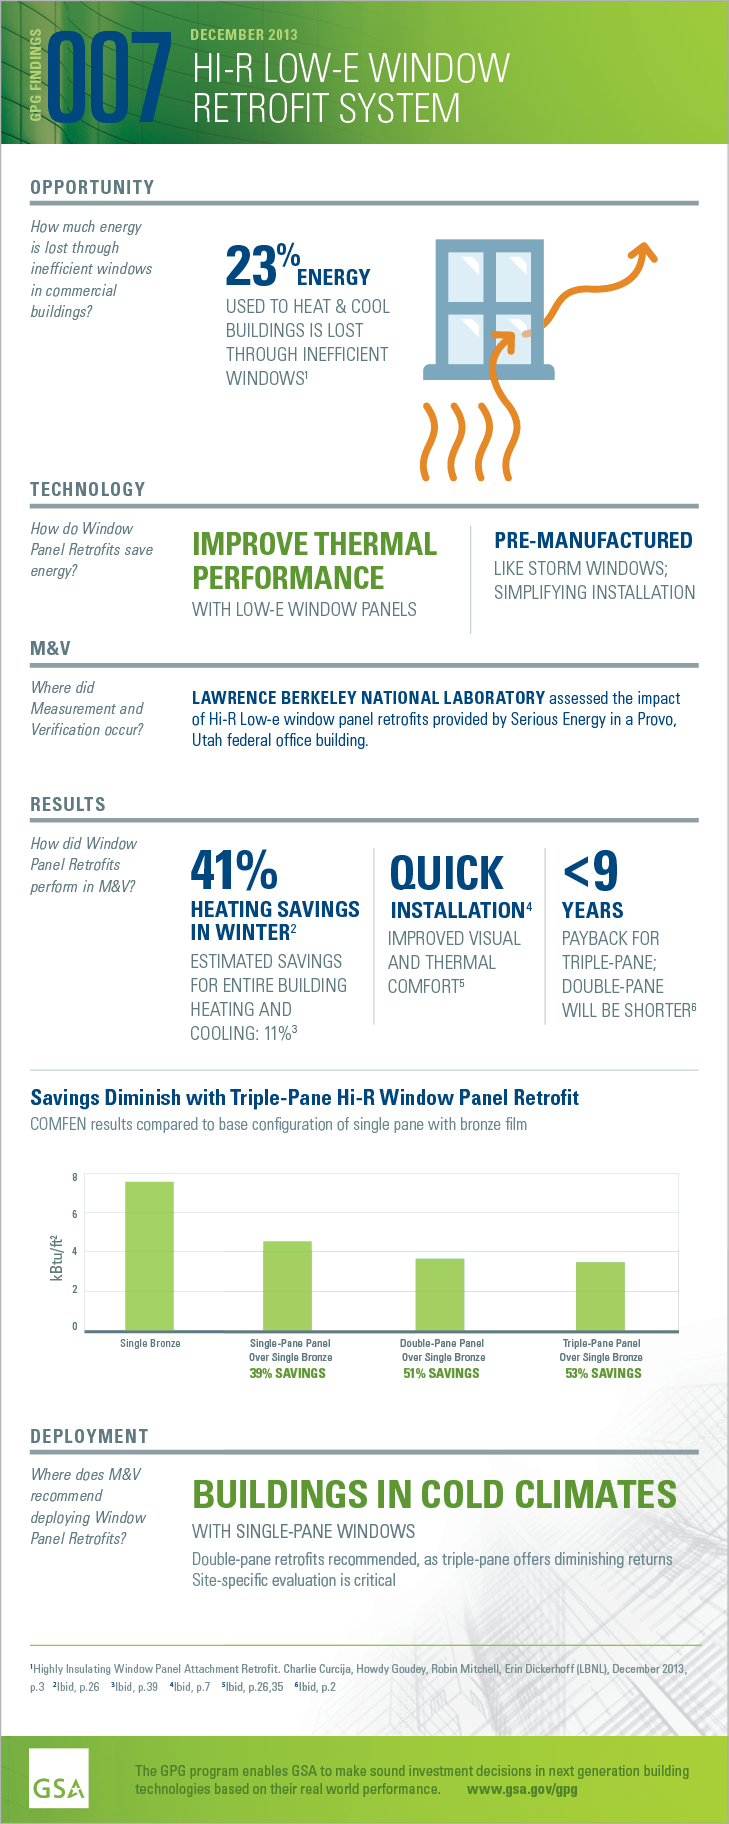 Download the PDF of the full-size infographic for GPG007 Hi-R Low-E Window Retrofit System.